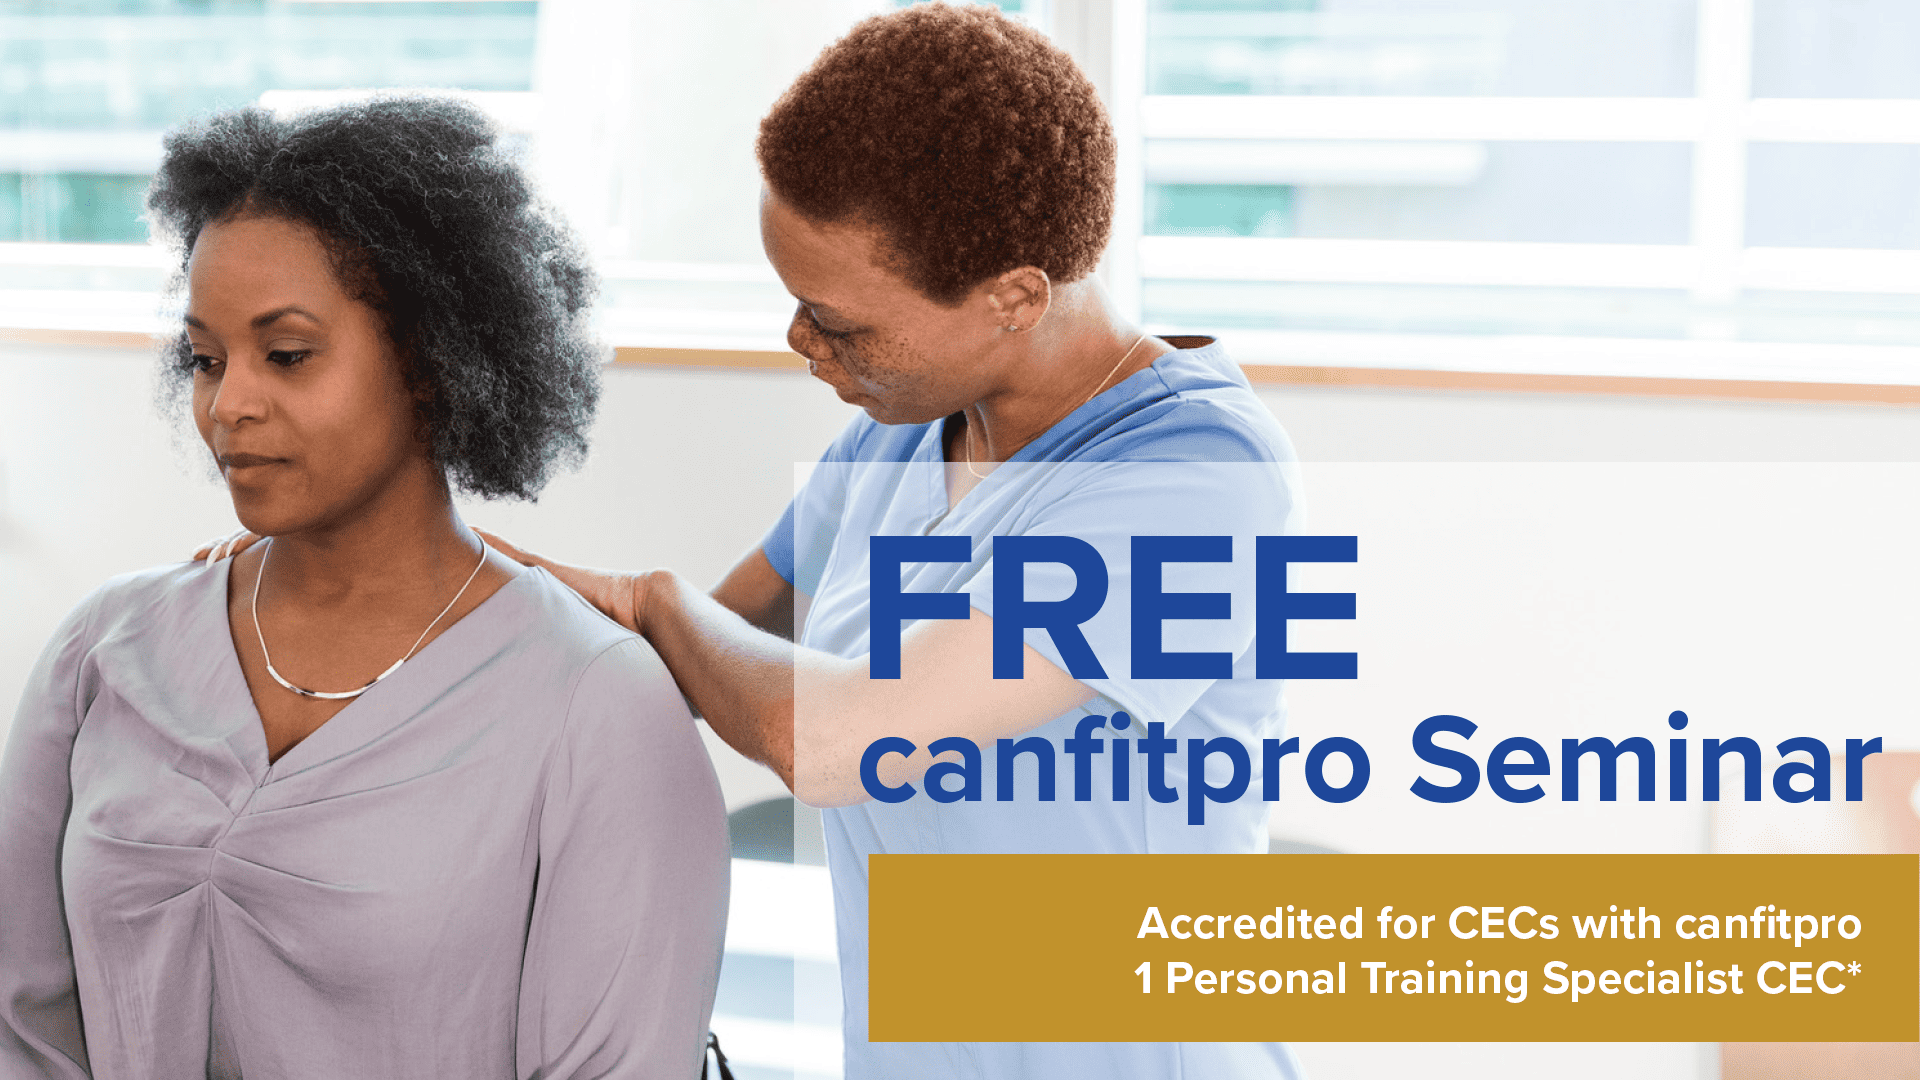 Featured image for https://williscollege.com/upcoming-events/continuing-education-credit-for-canfitpro-learn-about-becoming-a-massage-therapist/ event